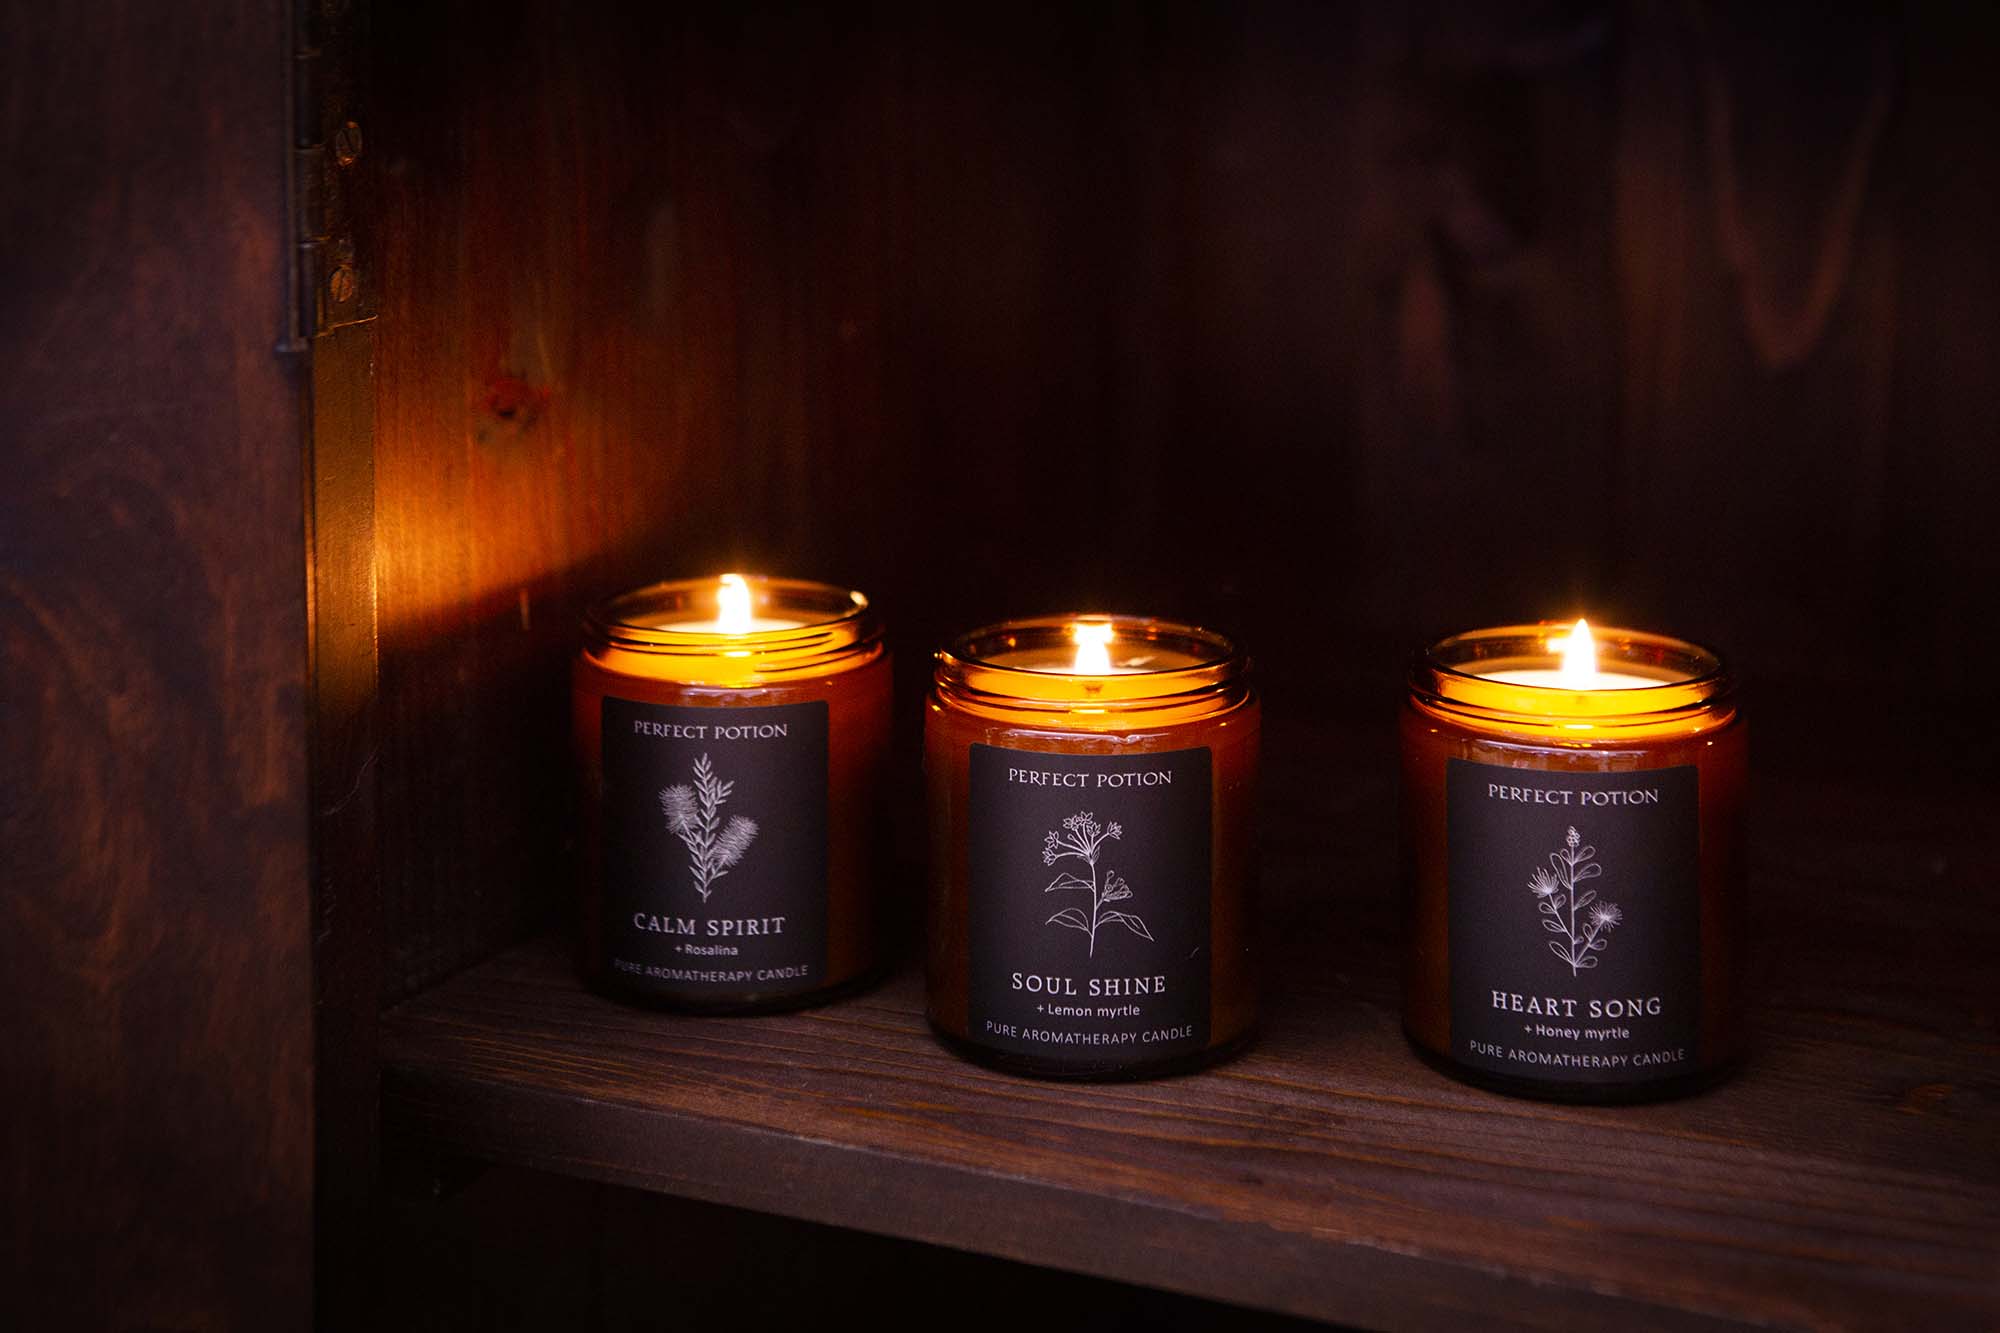 Pure Aromatherapy Candles Are Finally Here